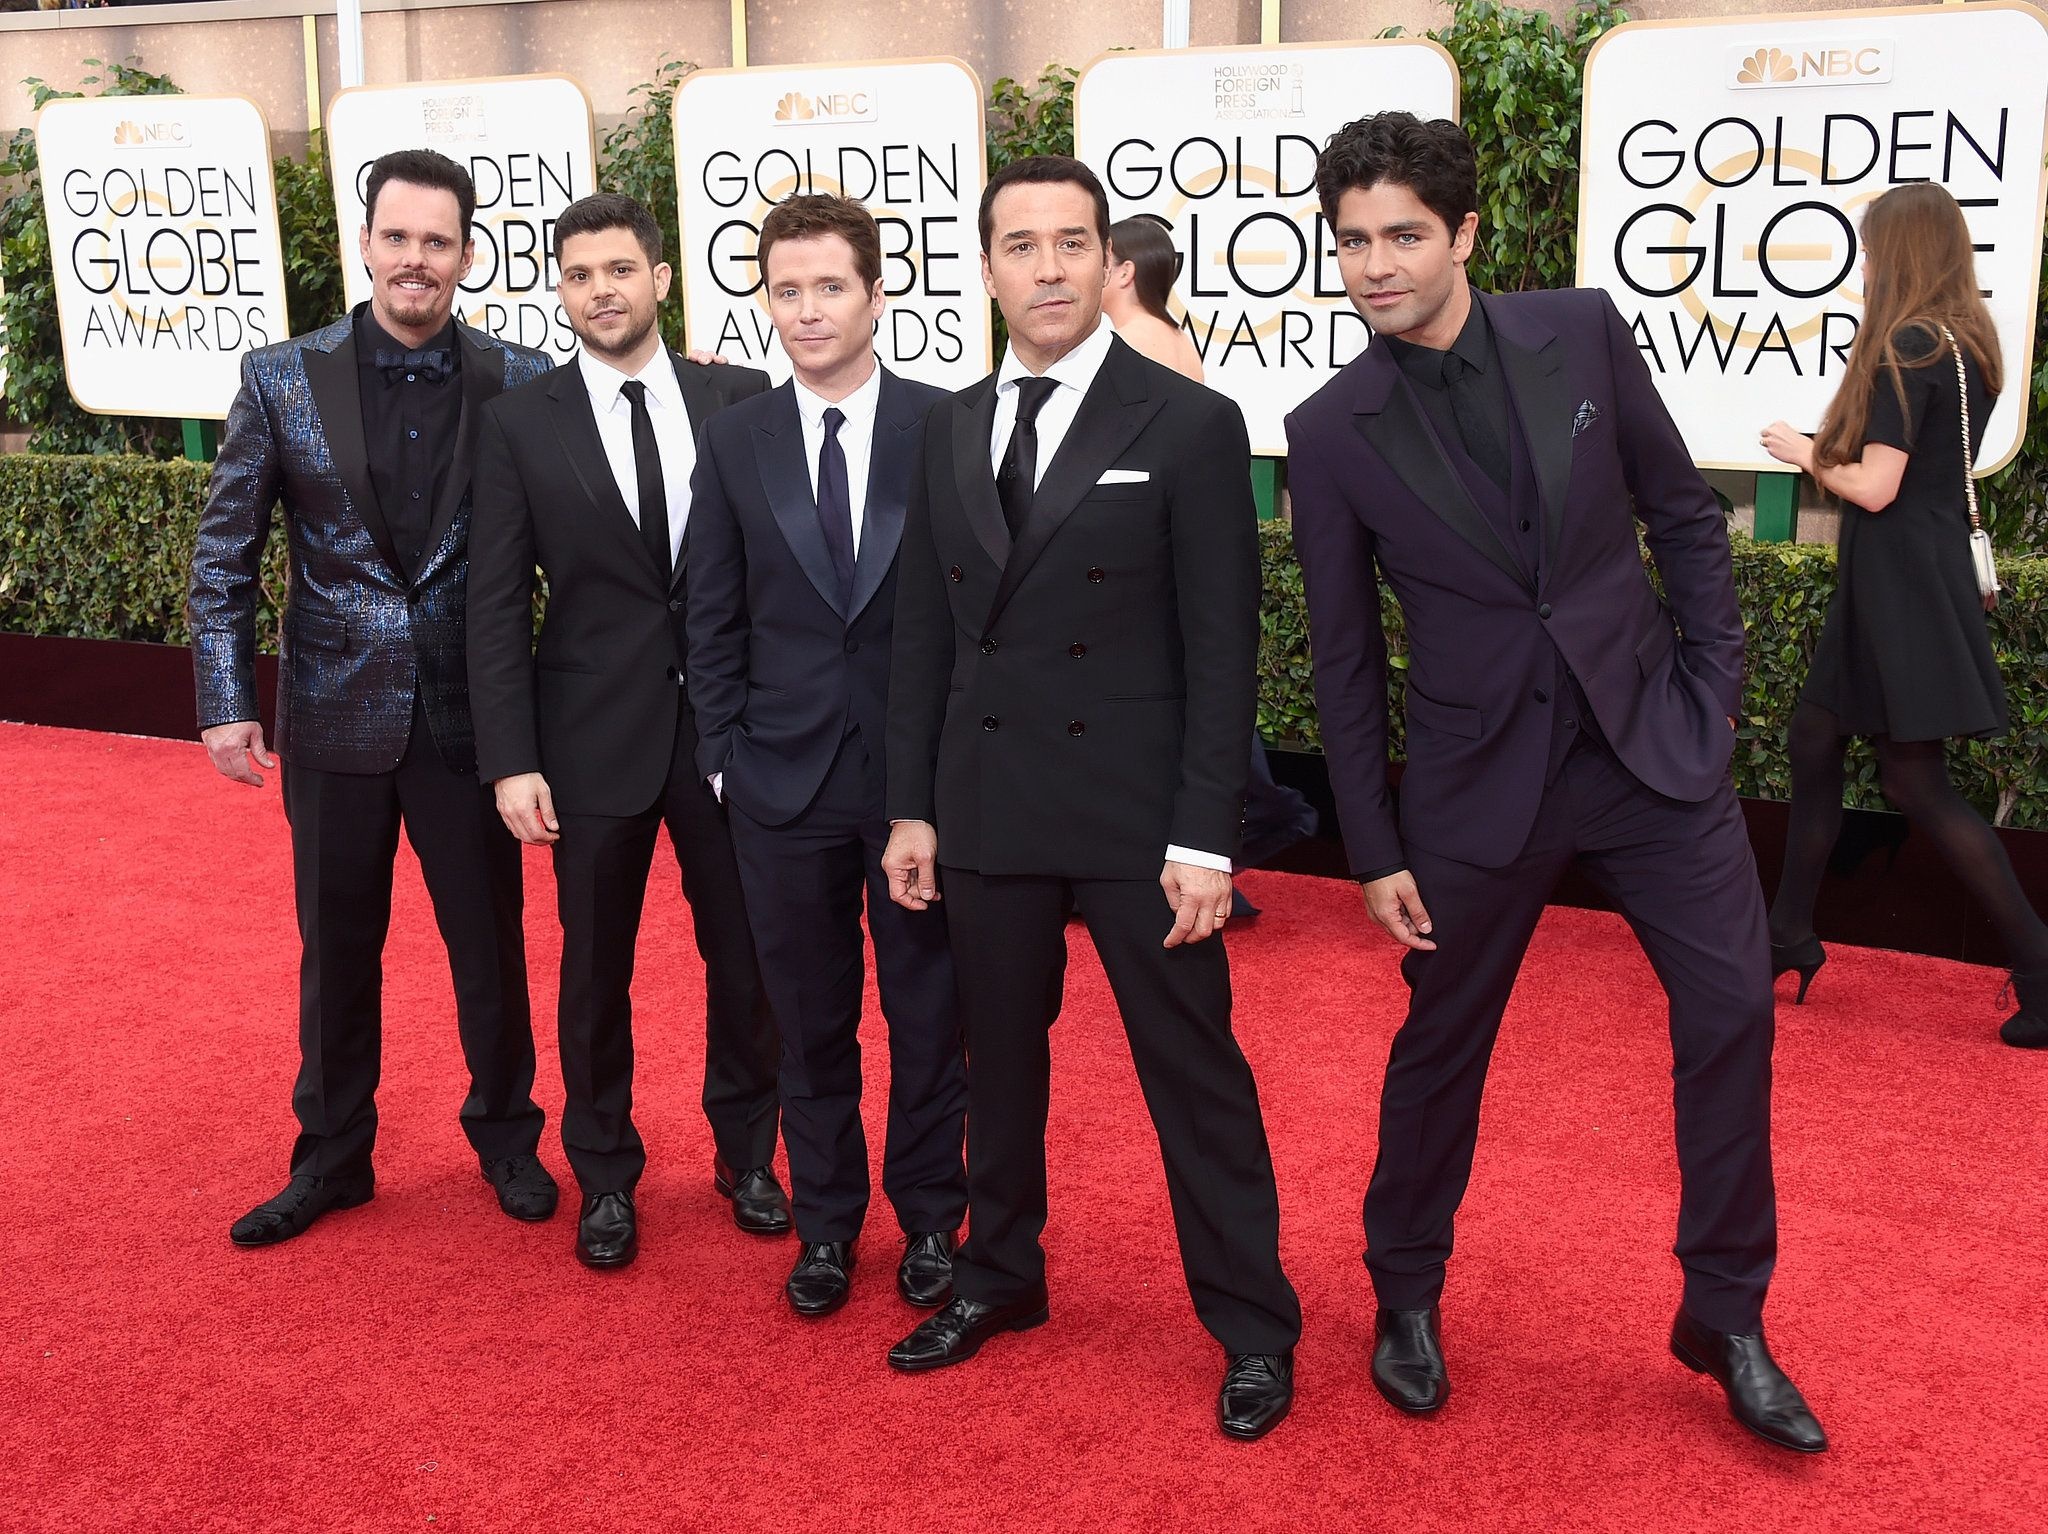 Kevin Connolly: Golden Globe Awards, Cast of Entourage, An American comedy-drama television show. 2050x1540 HD Wallpaper.